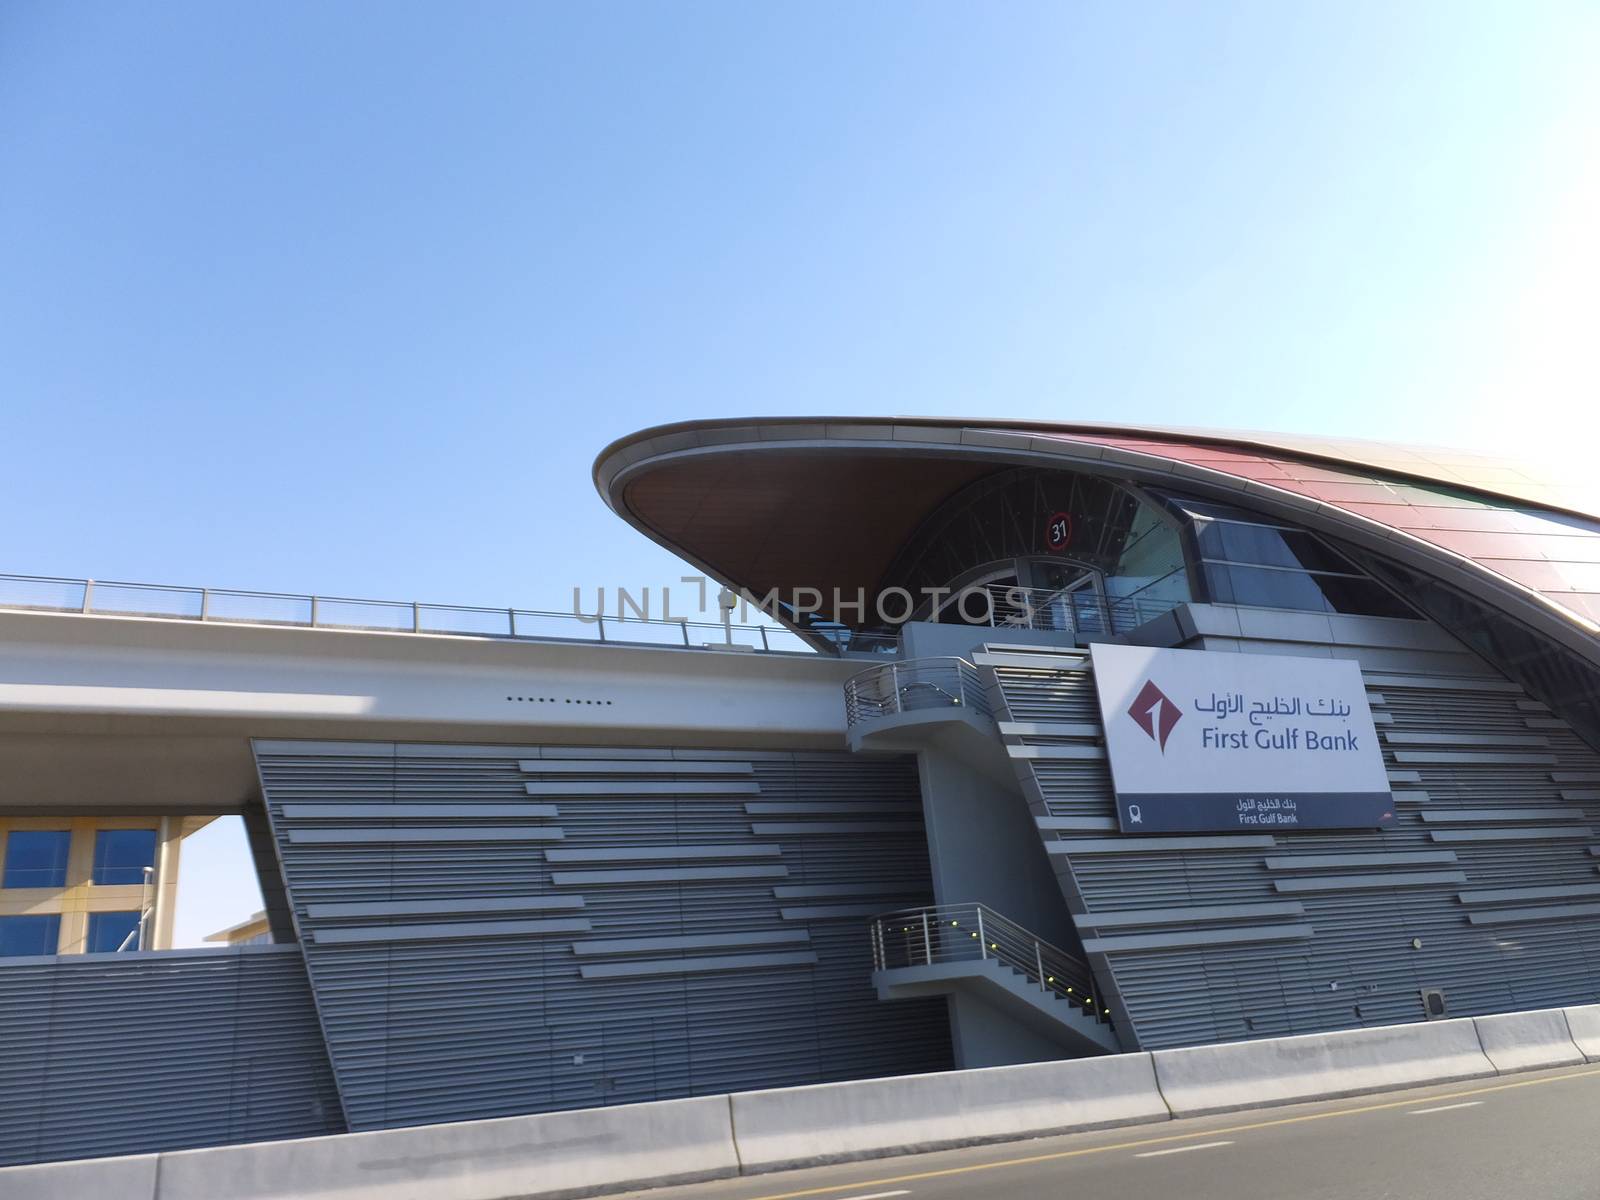 First Gulf Bank Metro Station in Dubai, UAE. Dubai Metro is a driverless network. Guinness World Records declared it the worlds longest fully automated metro network at 47 miles.